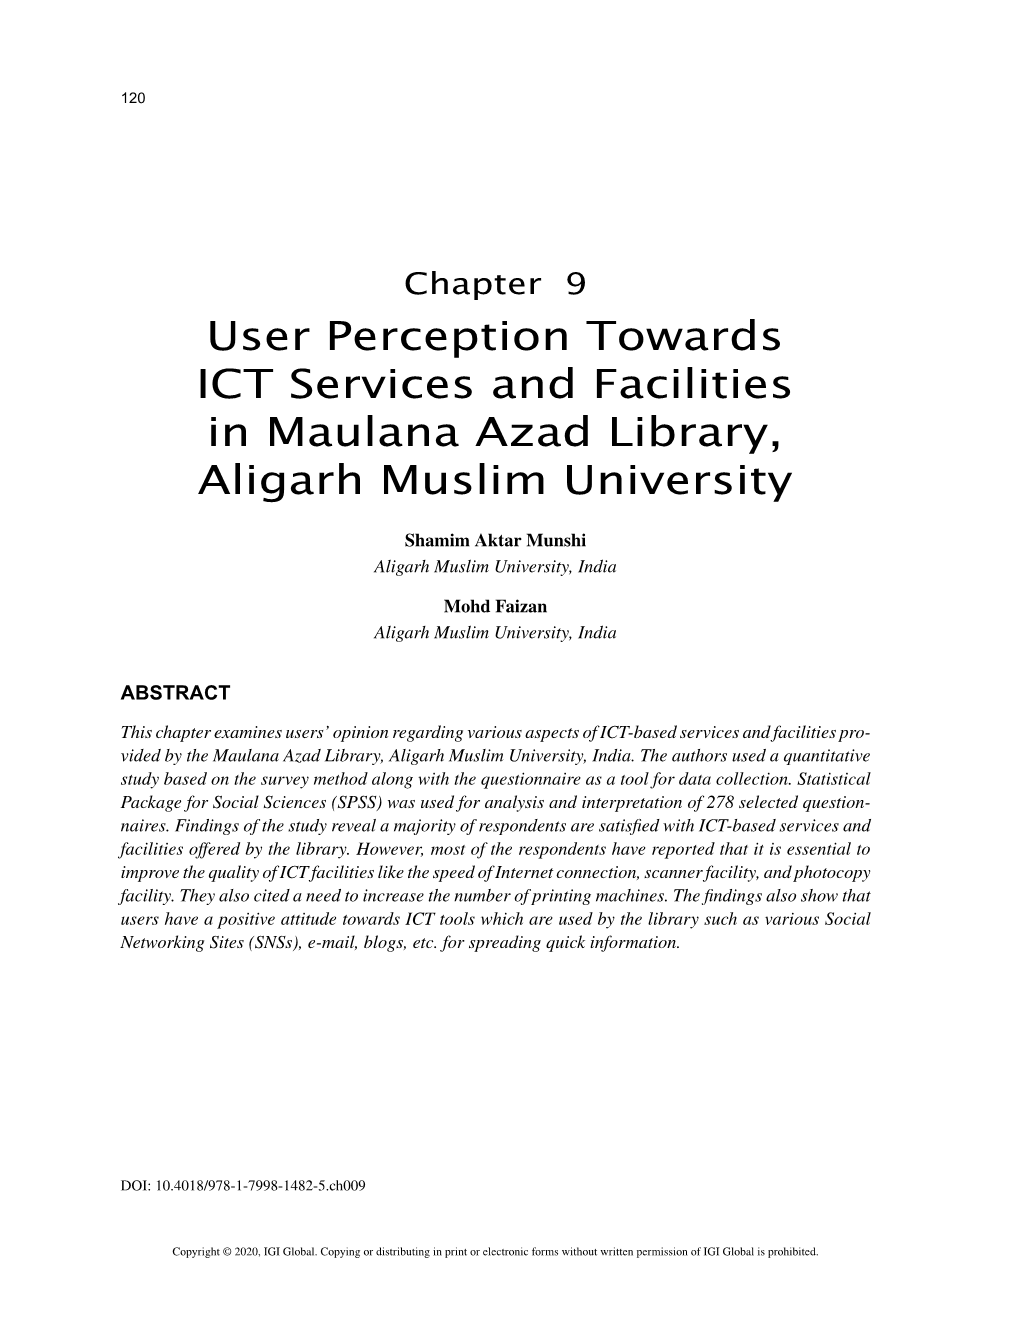 User Perception Towards ICT Services and Facilities in Maulana Azad Library, Aligarh Muslim University